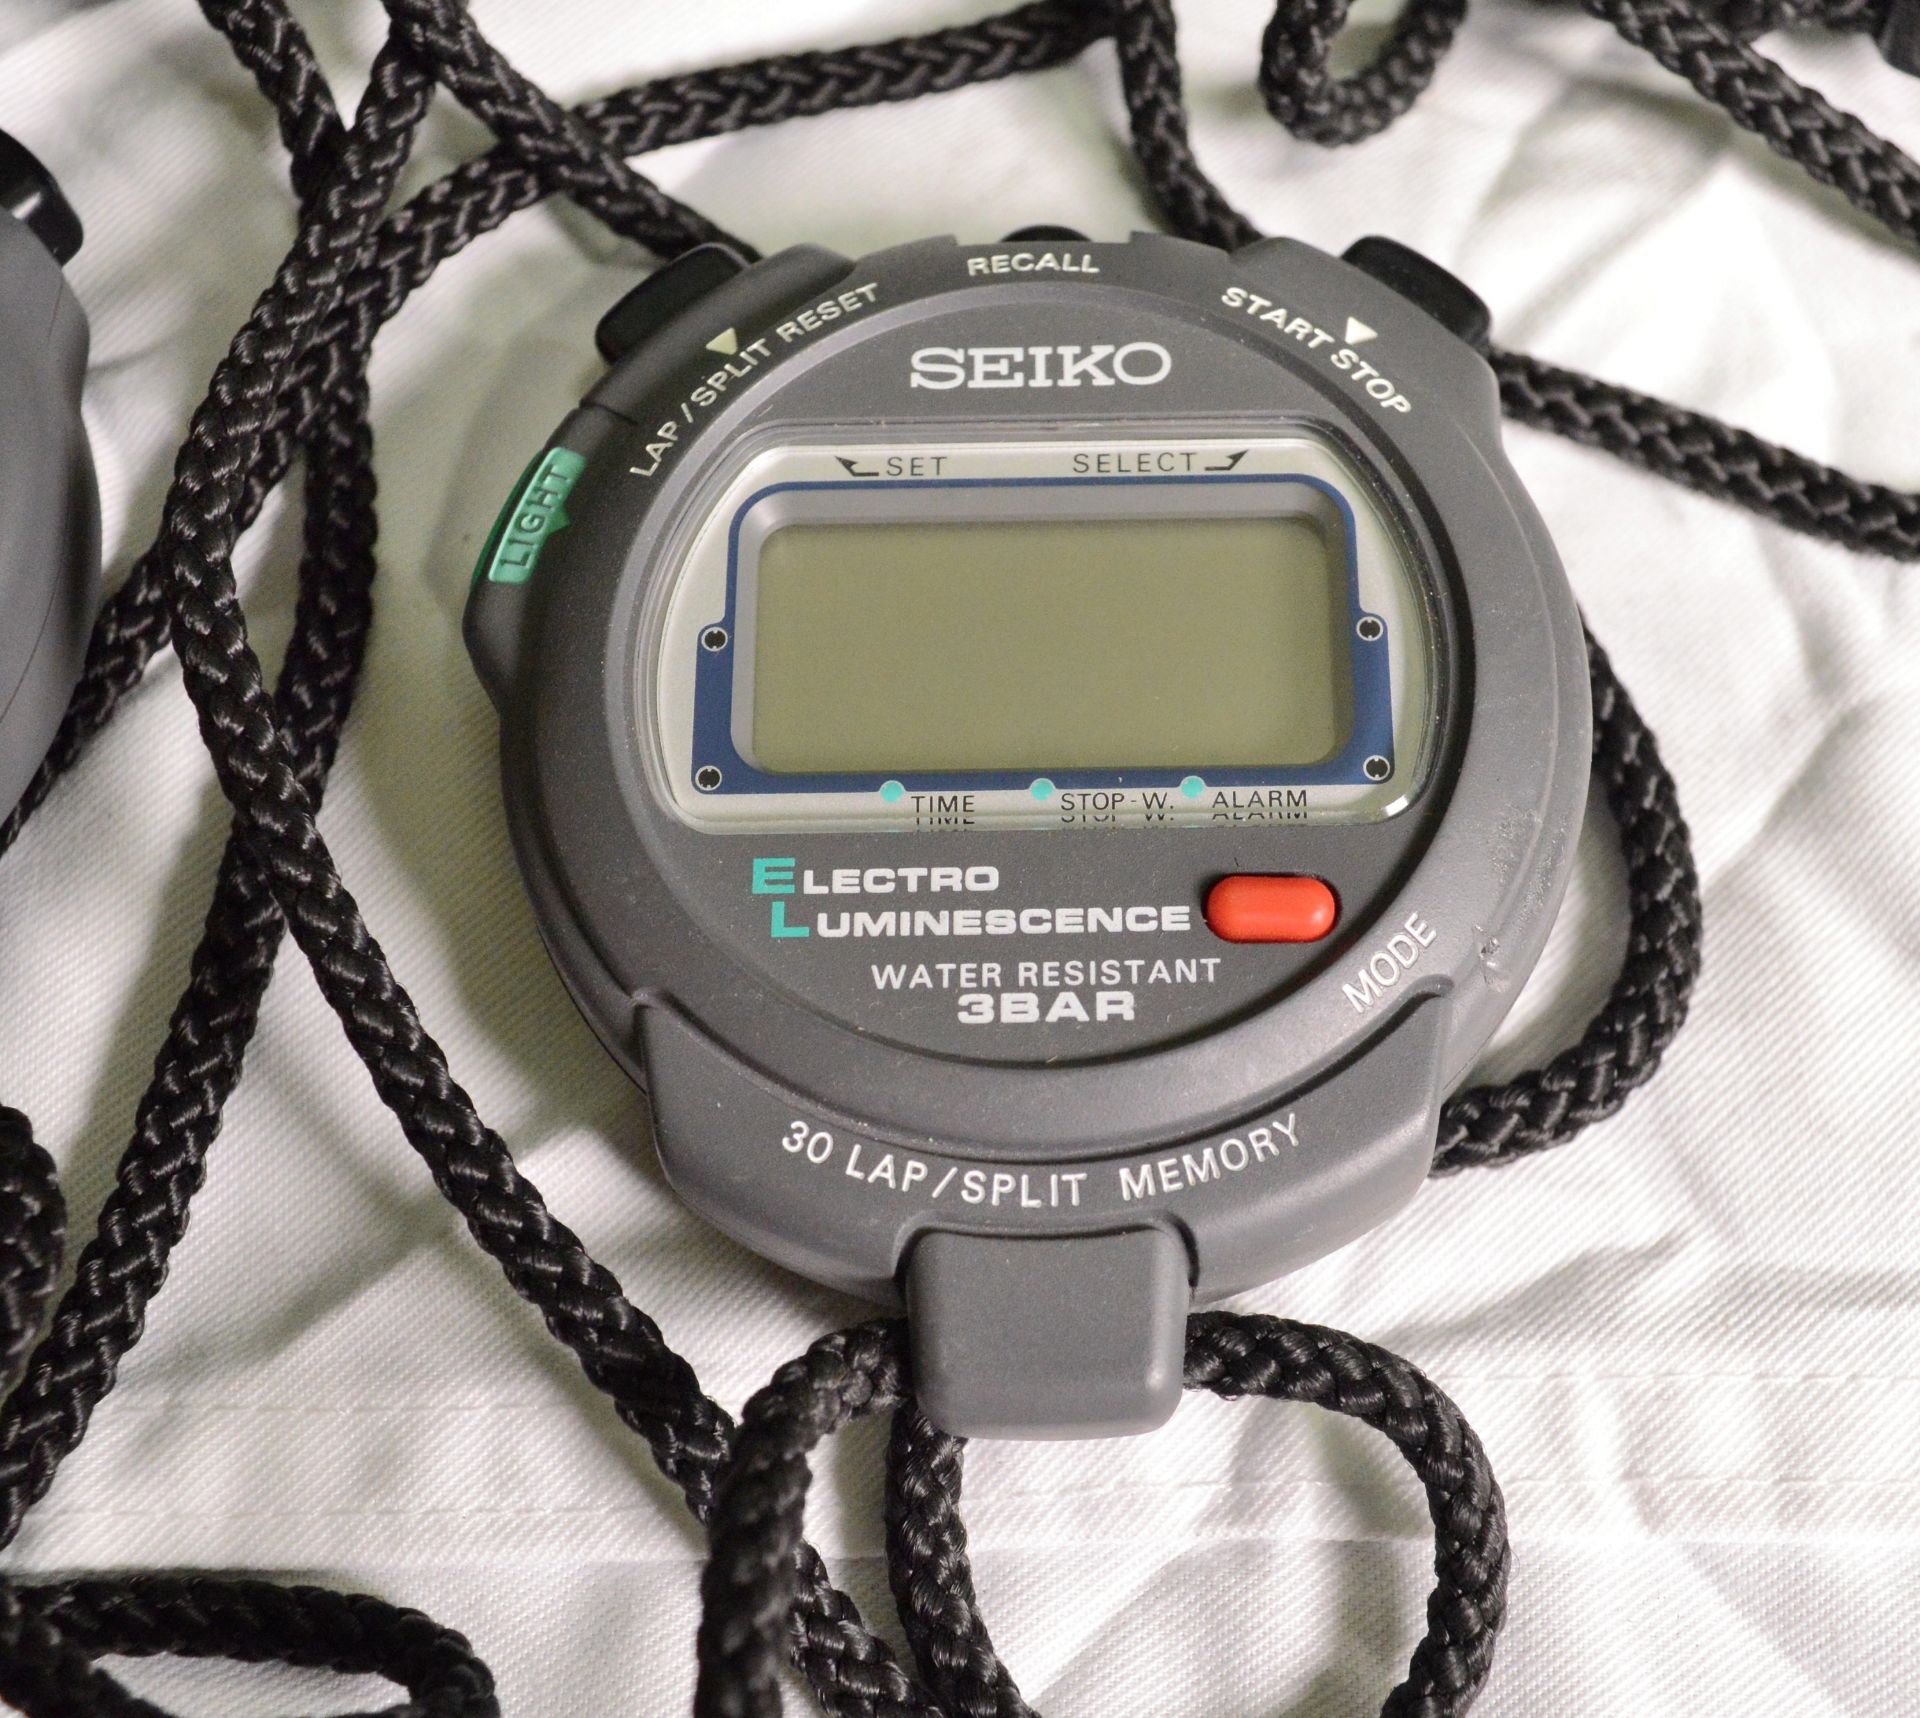 2x Seiko Digital Stopwatches with Case. - Image 5 of 5